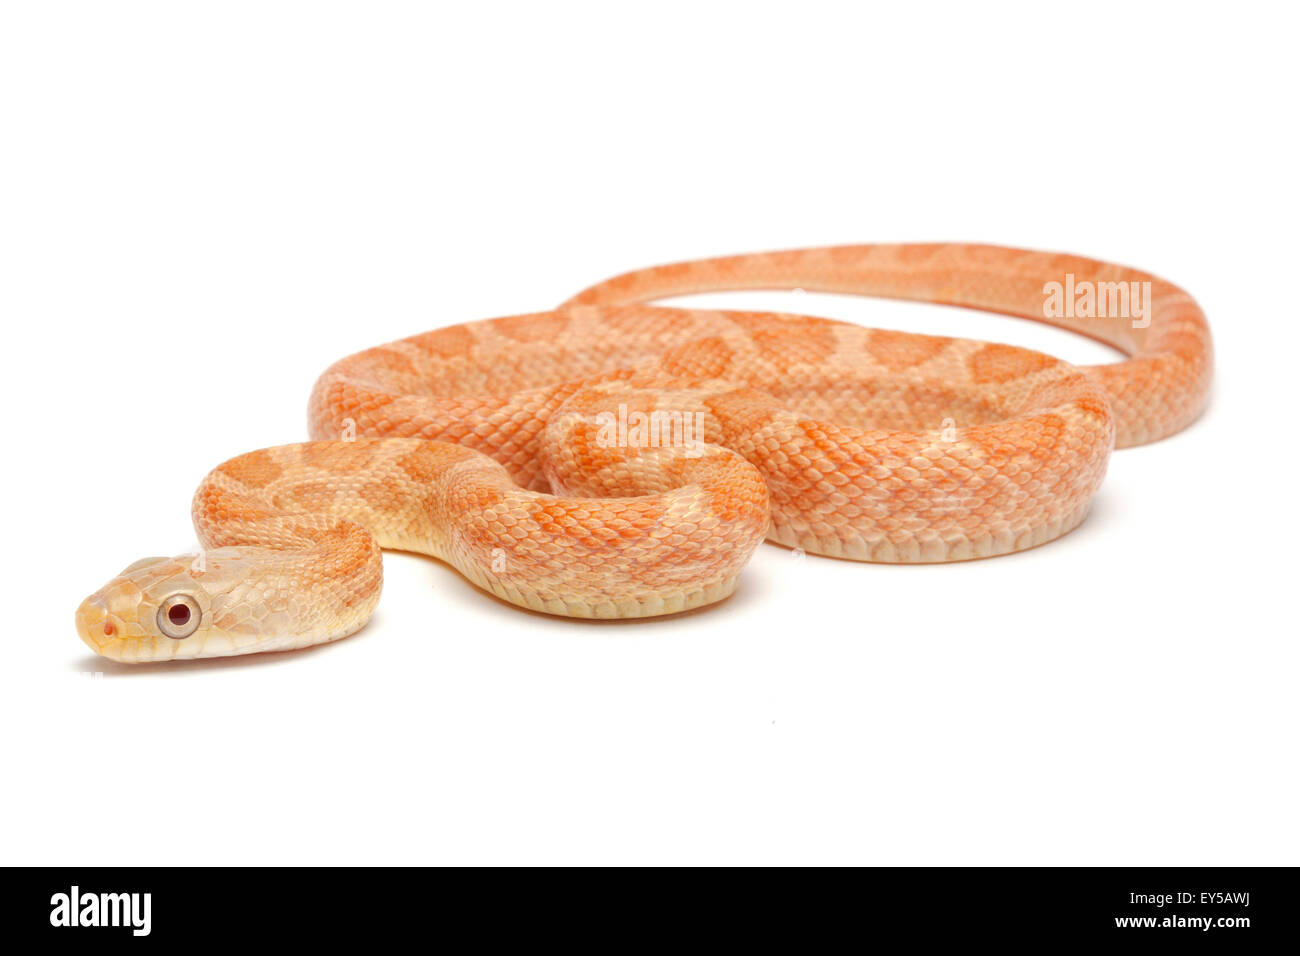 Eastern Rat Snake on white background Native to eastern North America Stock Photo